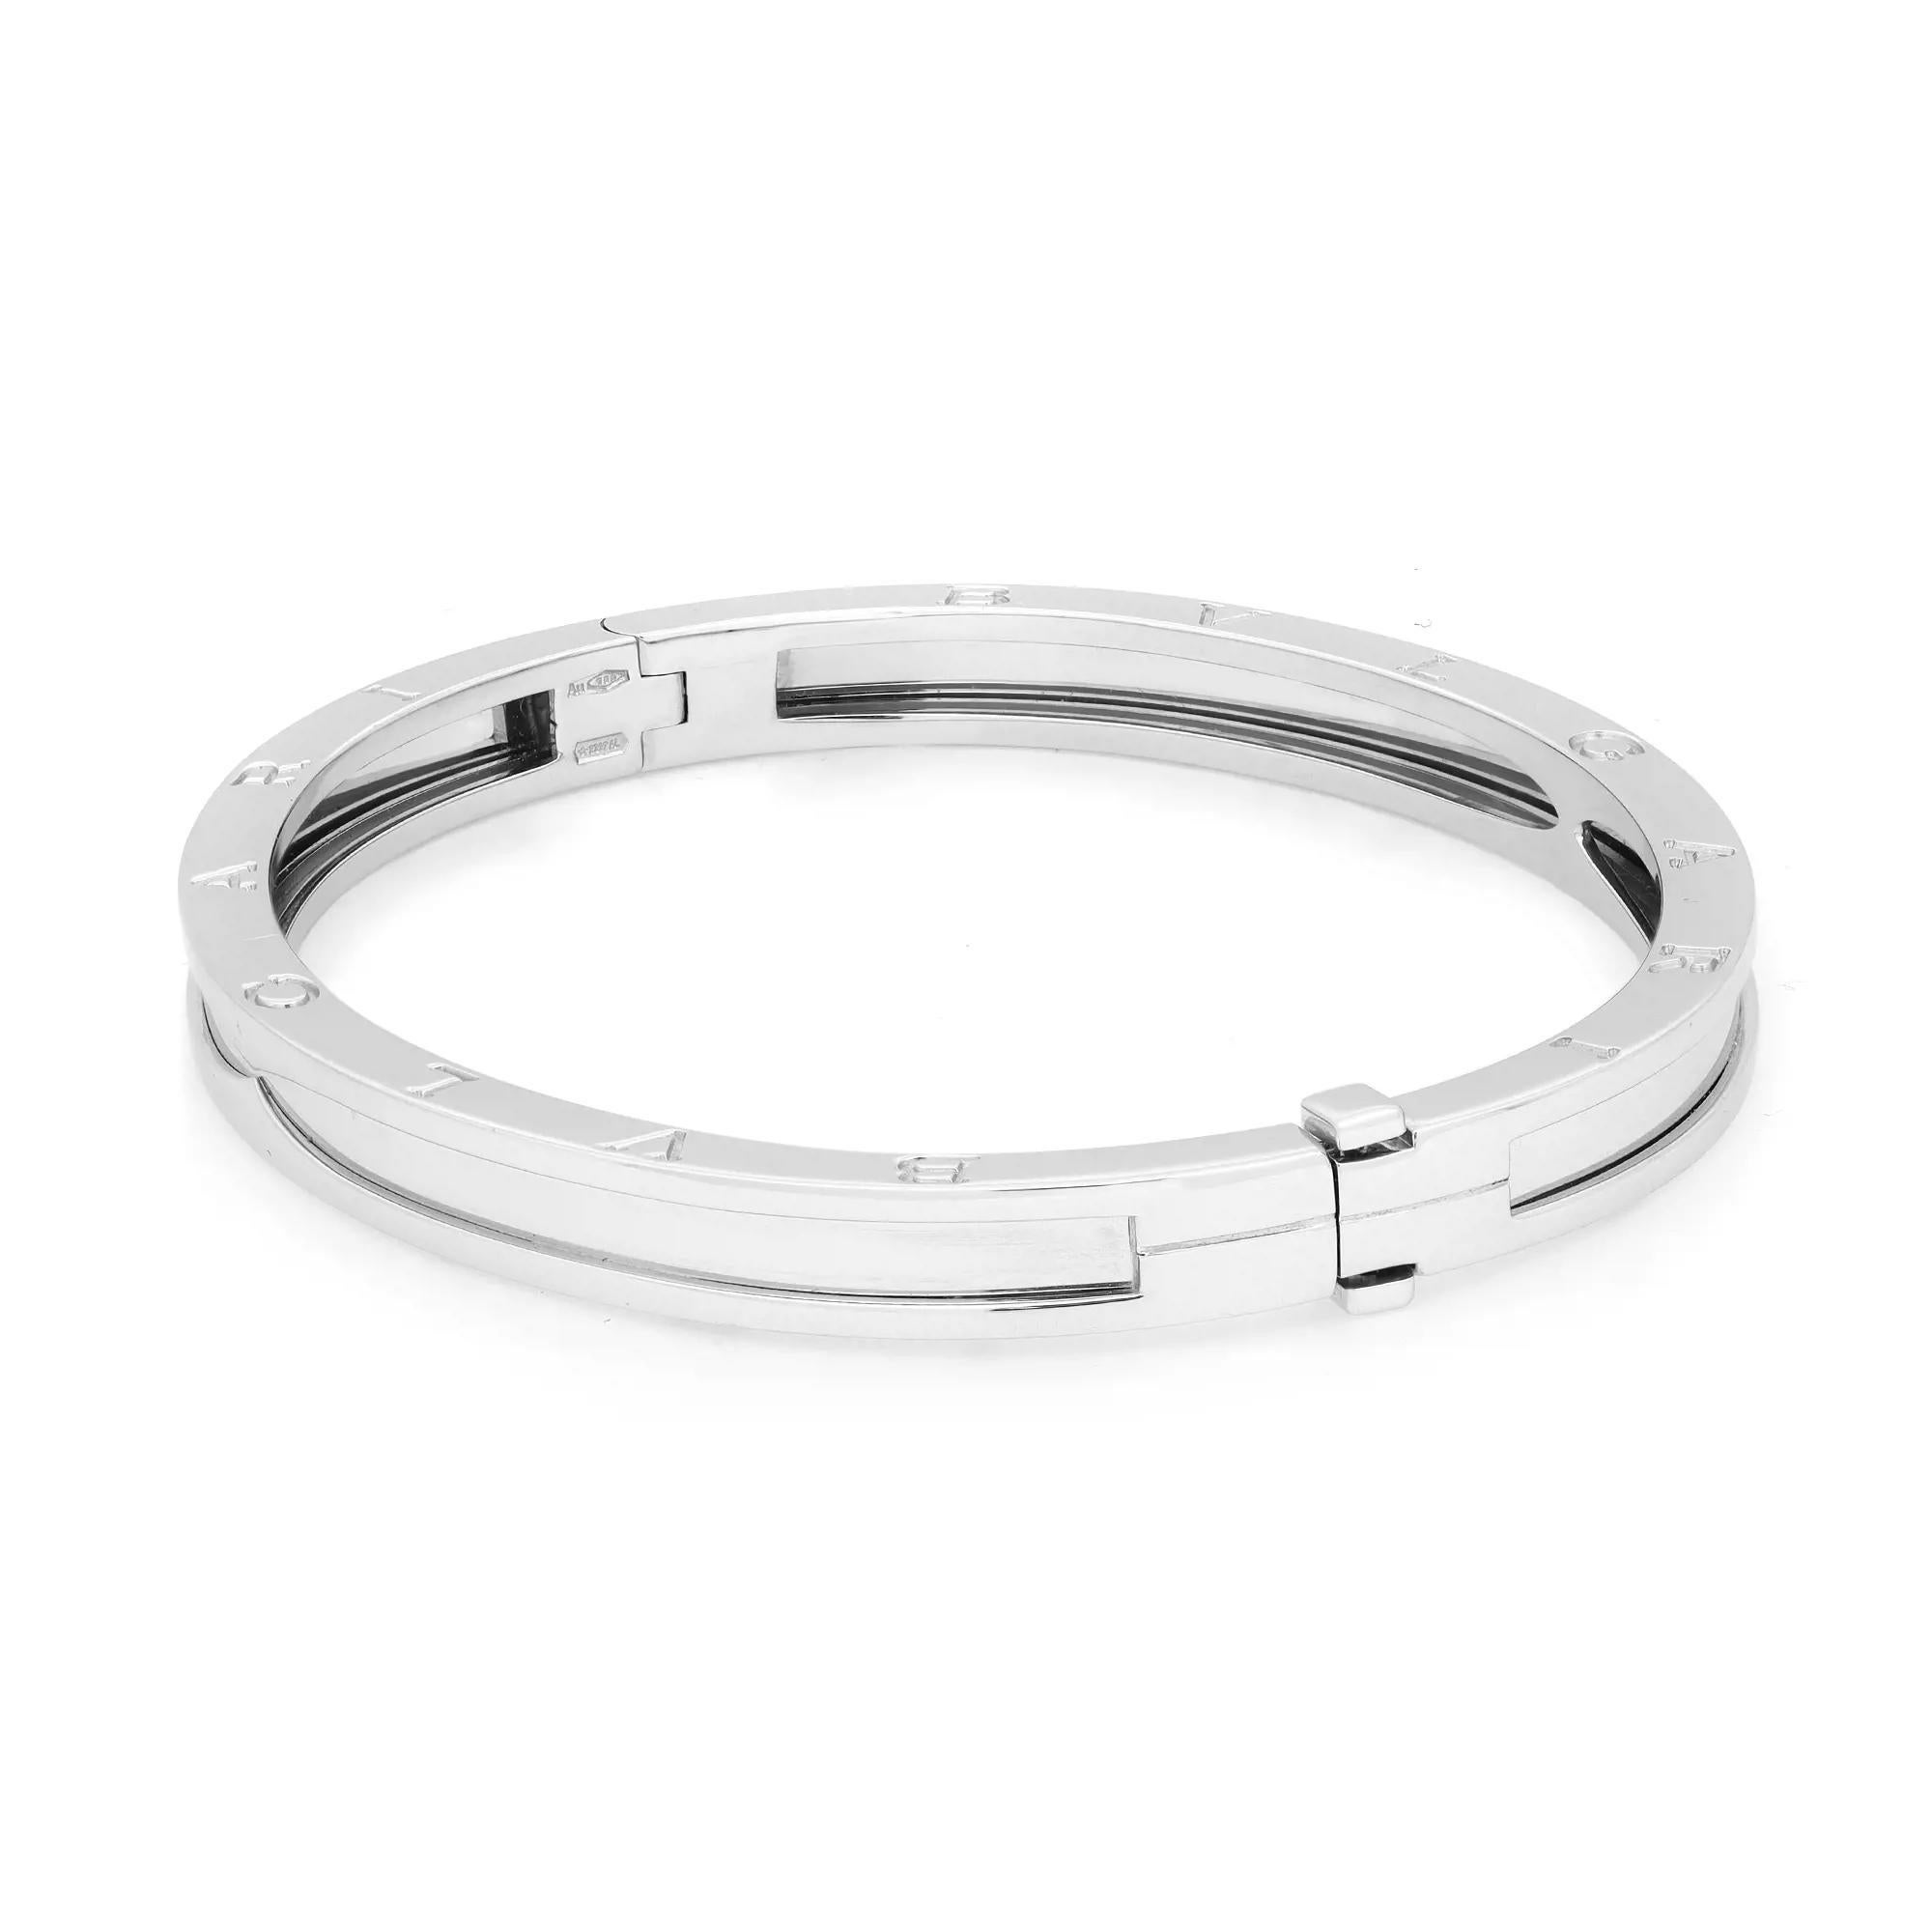 The B.Zero1 bangle bracelet is a true statement of Bvlgari’s creative vision. Well crafted in 18K white gold. This bracelet features Bvlgari logo engraving on the edges with a press on box closure. Size: Medium. Wrist measurement: 7 inches. Width: